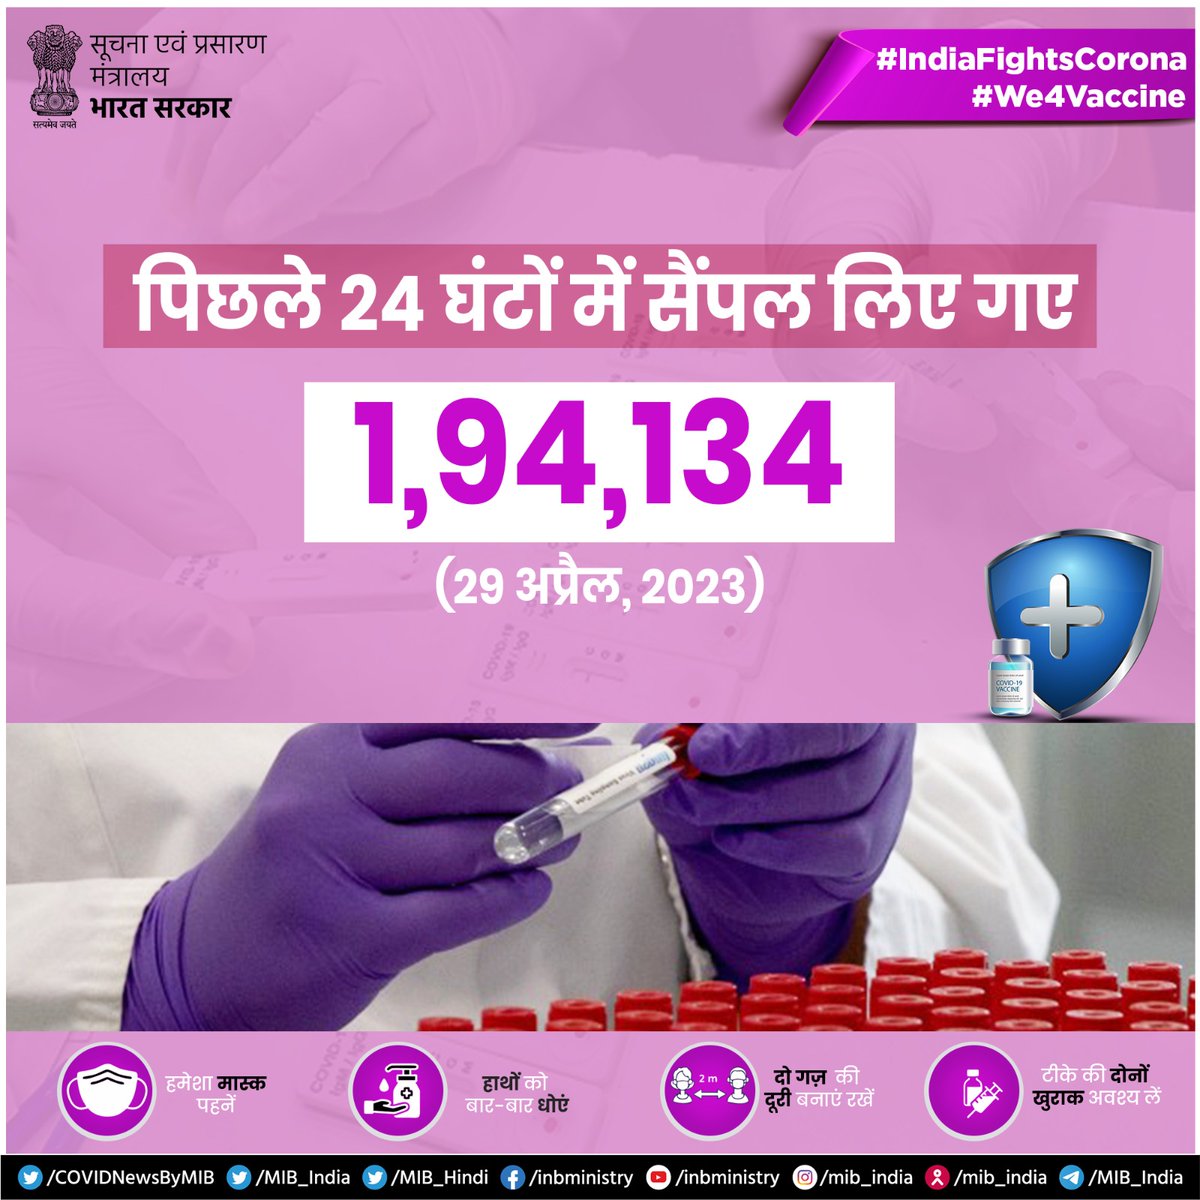 #IndiaFightsCorona: 📍More than 1 lakh 94 Thousand (1,94,134) #COVID19 samples tested in the last 24 hours. ✅Together, we can win the battle against COVID-19. ➡#StaySafe and keep following #COVIDAppropriateBehaviour #Unite2FightCorona #We4Vaccine #CovidIsNotOver